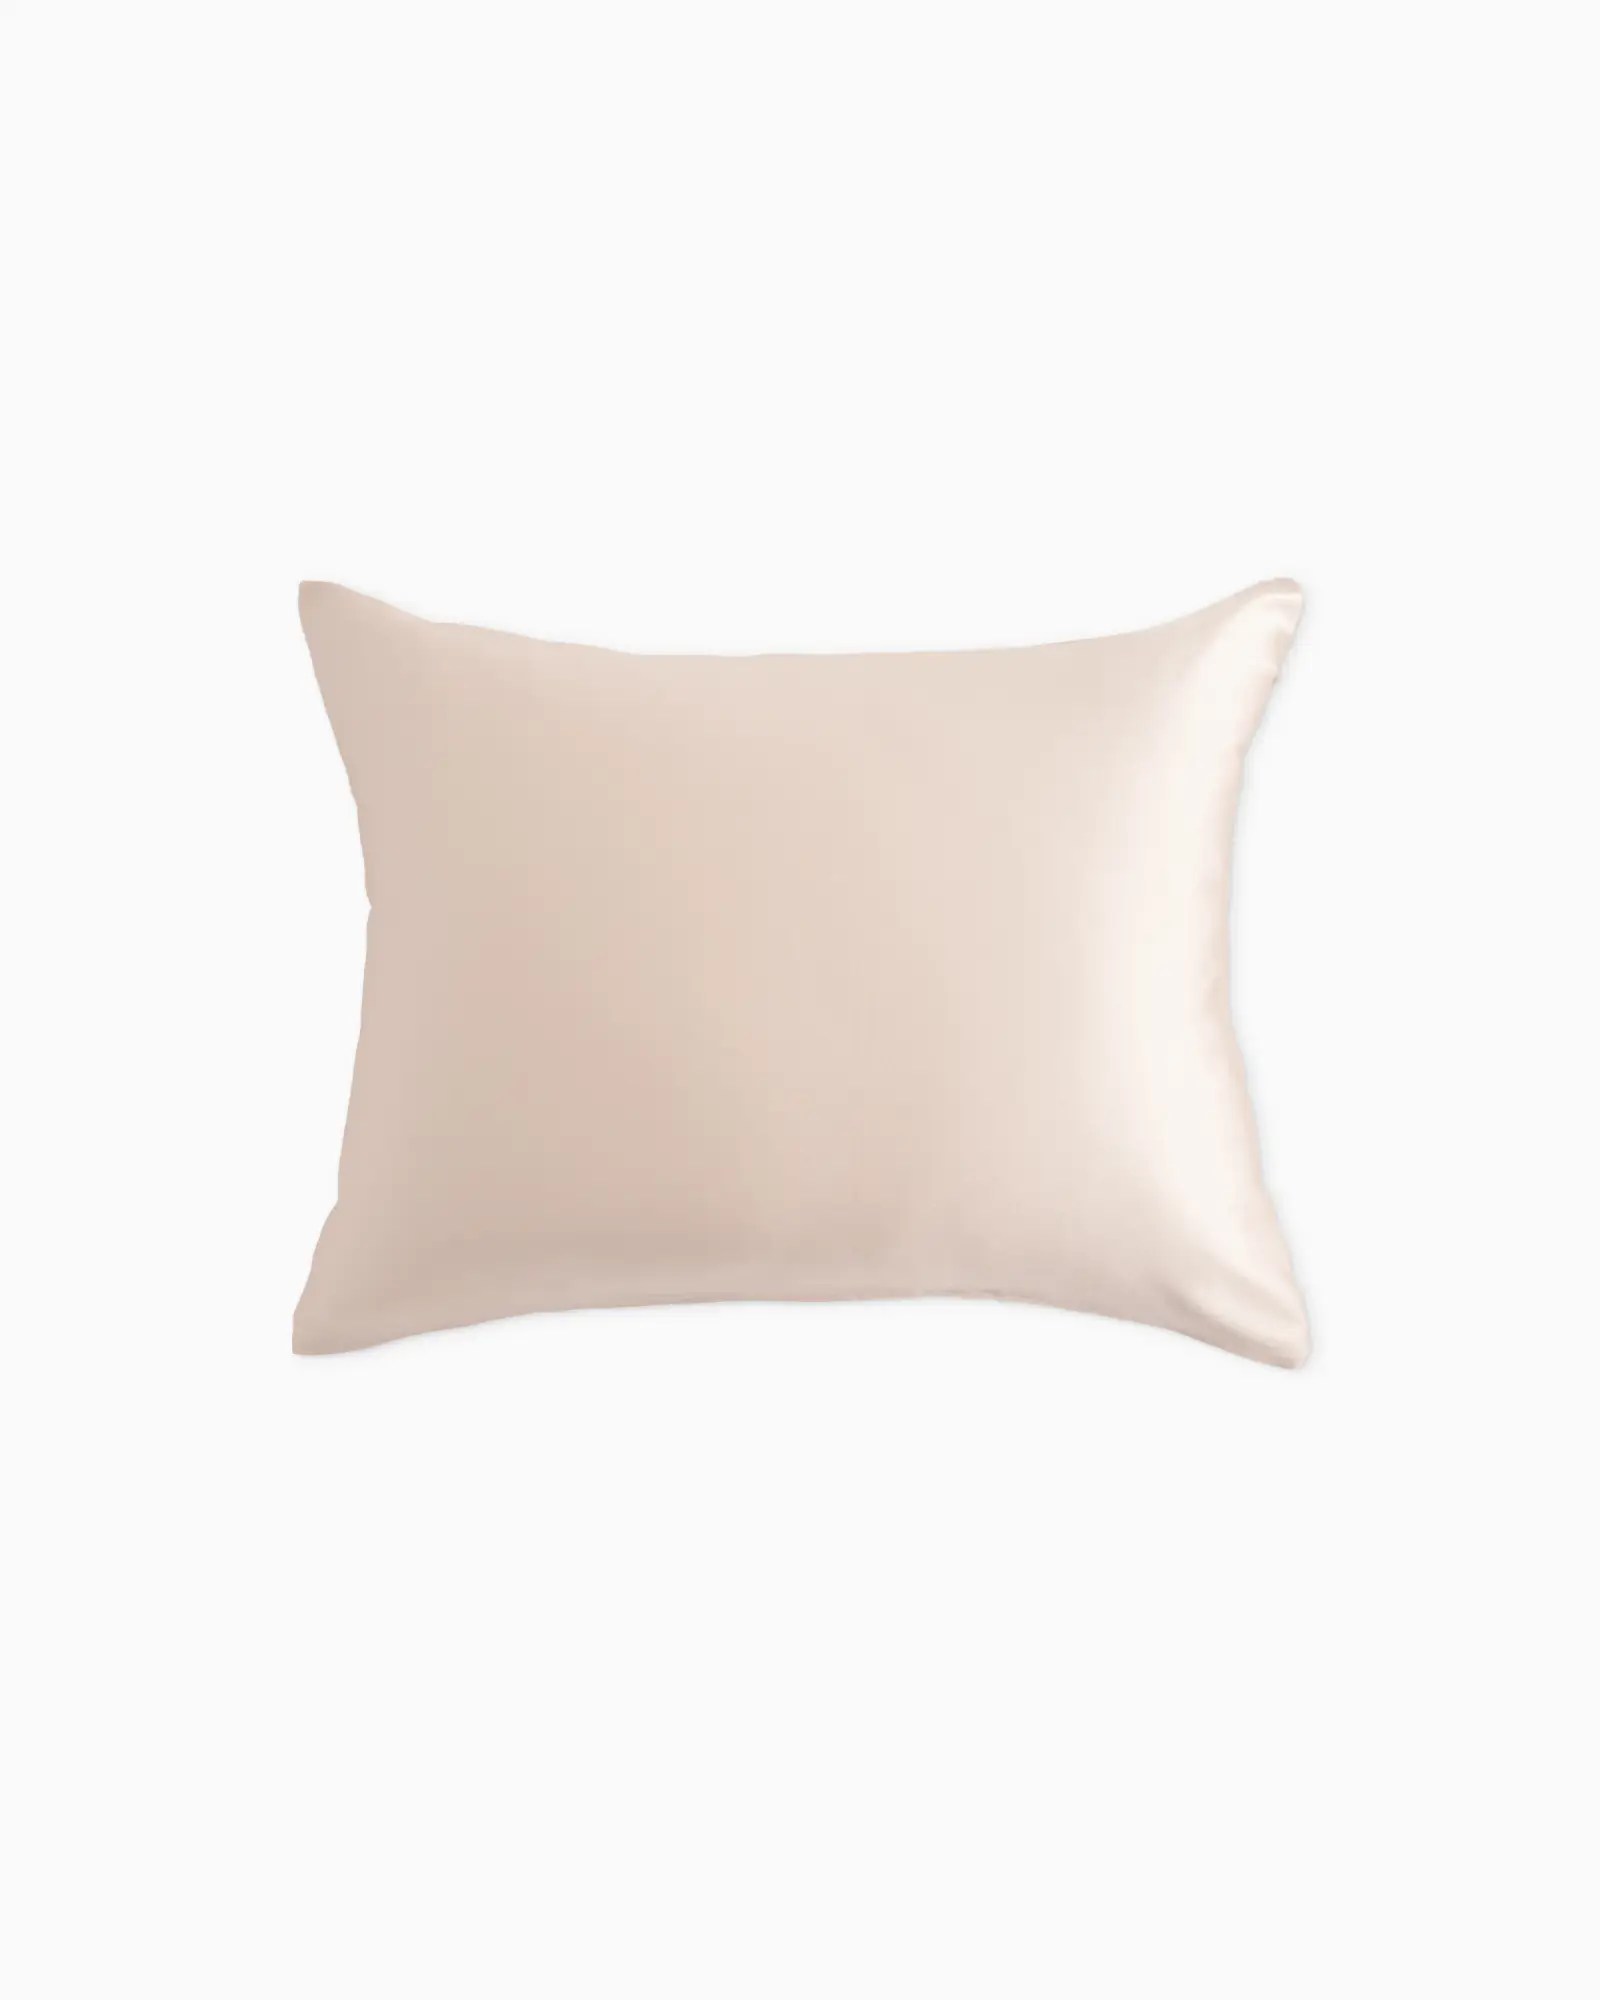 quince silk pillowcase on a white background